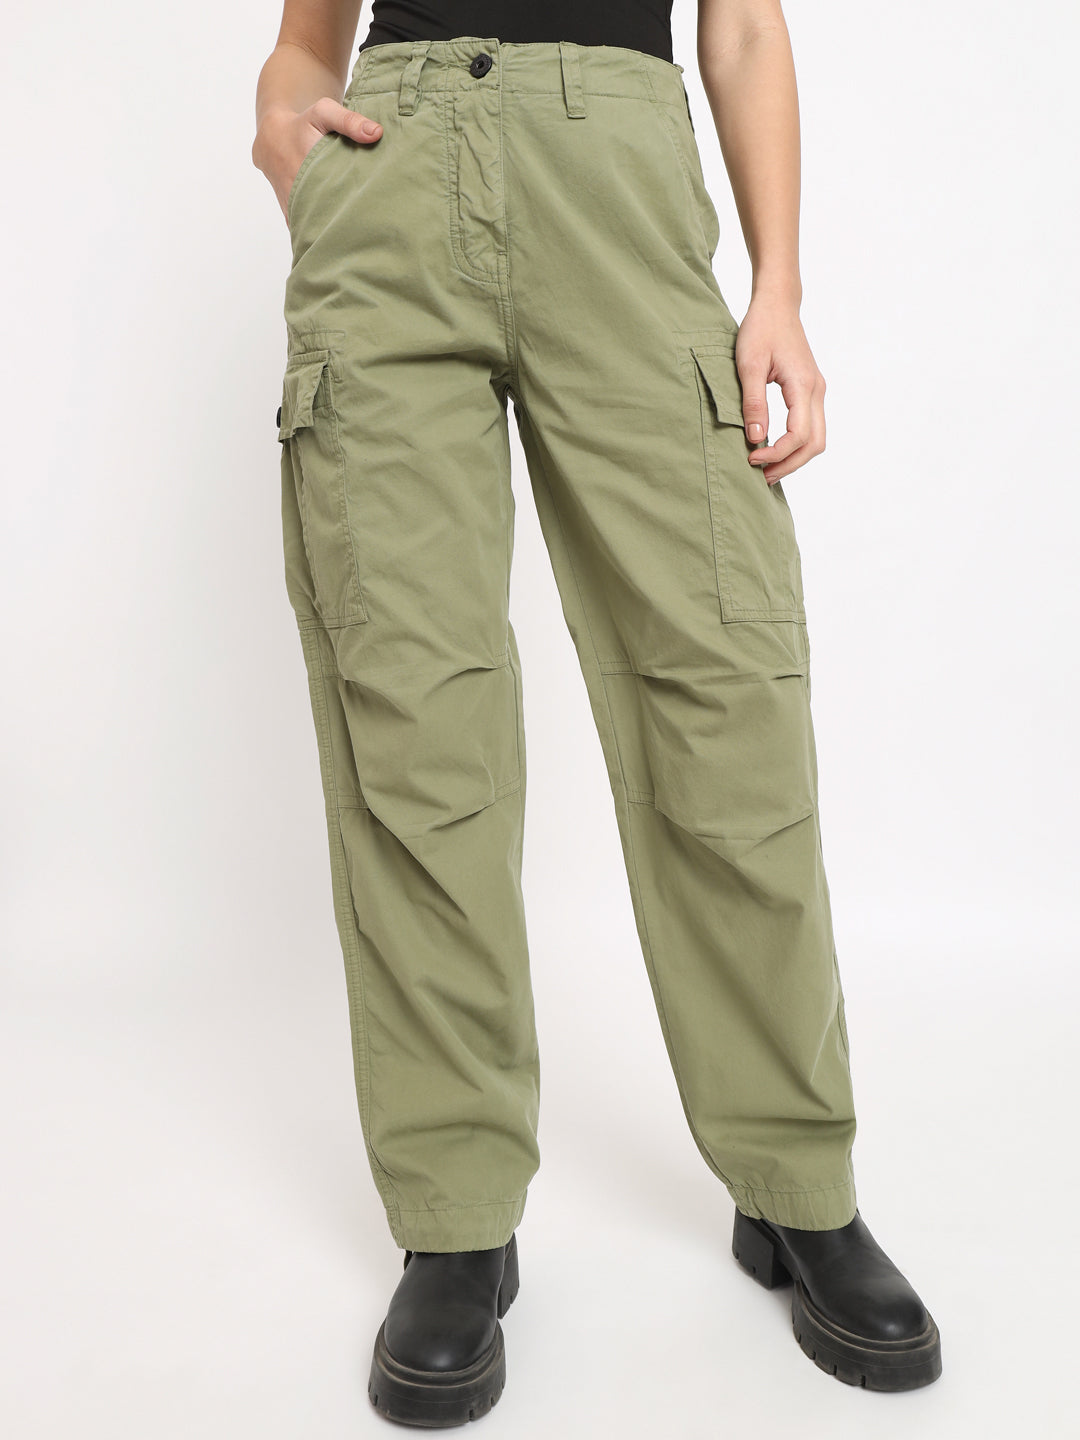 All in Motion KIDS Light Green Lined Cargo Pants (New with Tags) Size M  (8/10) | eBay